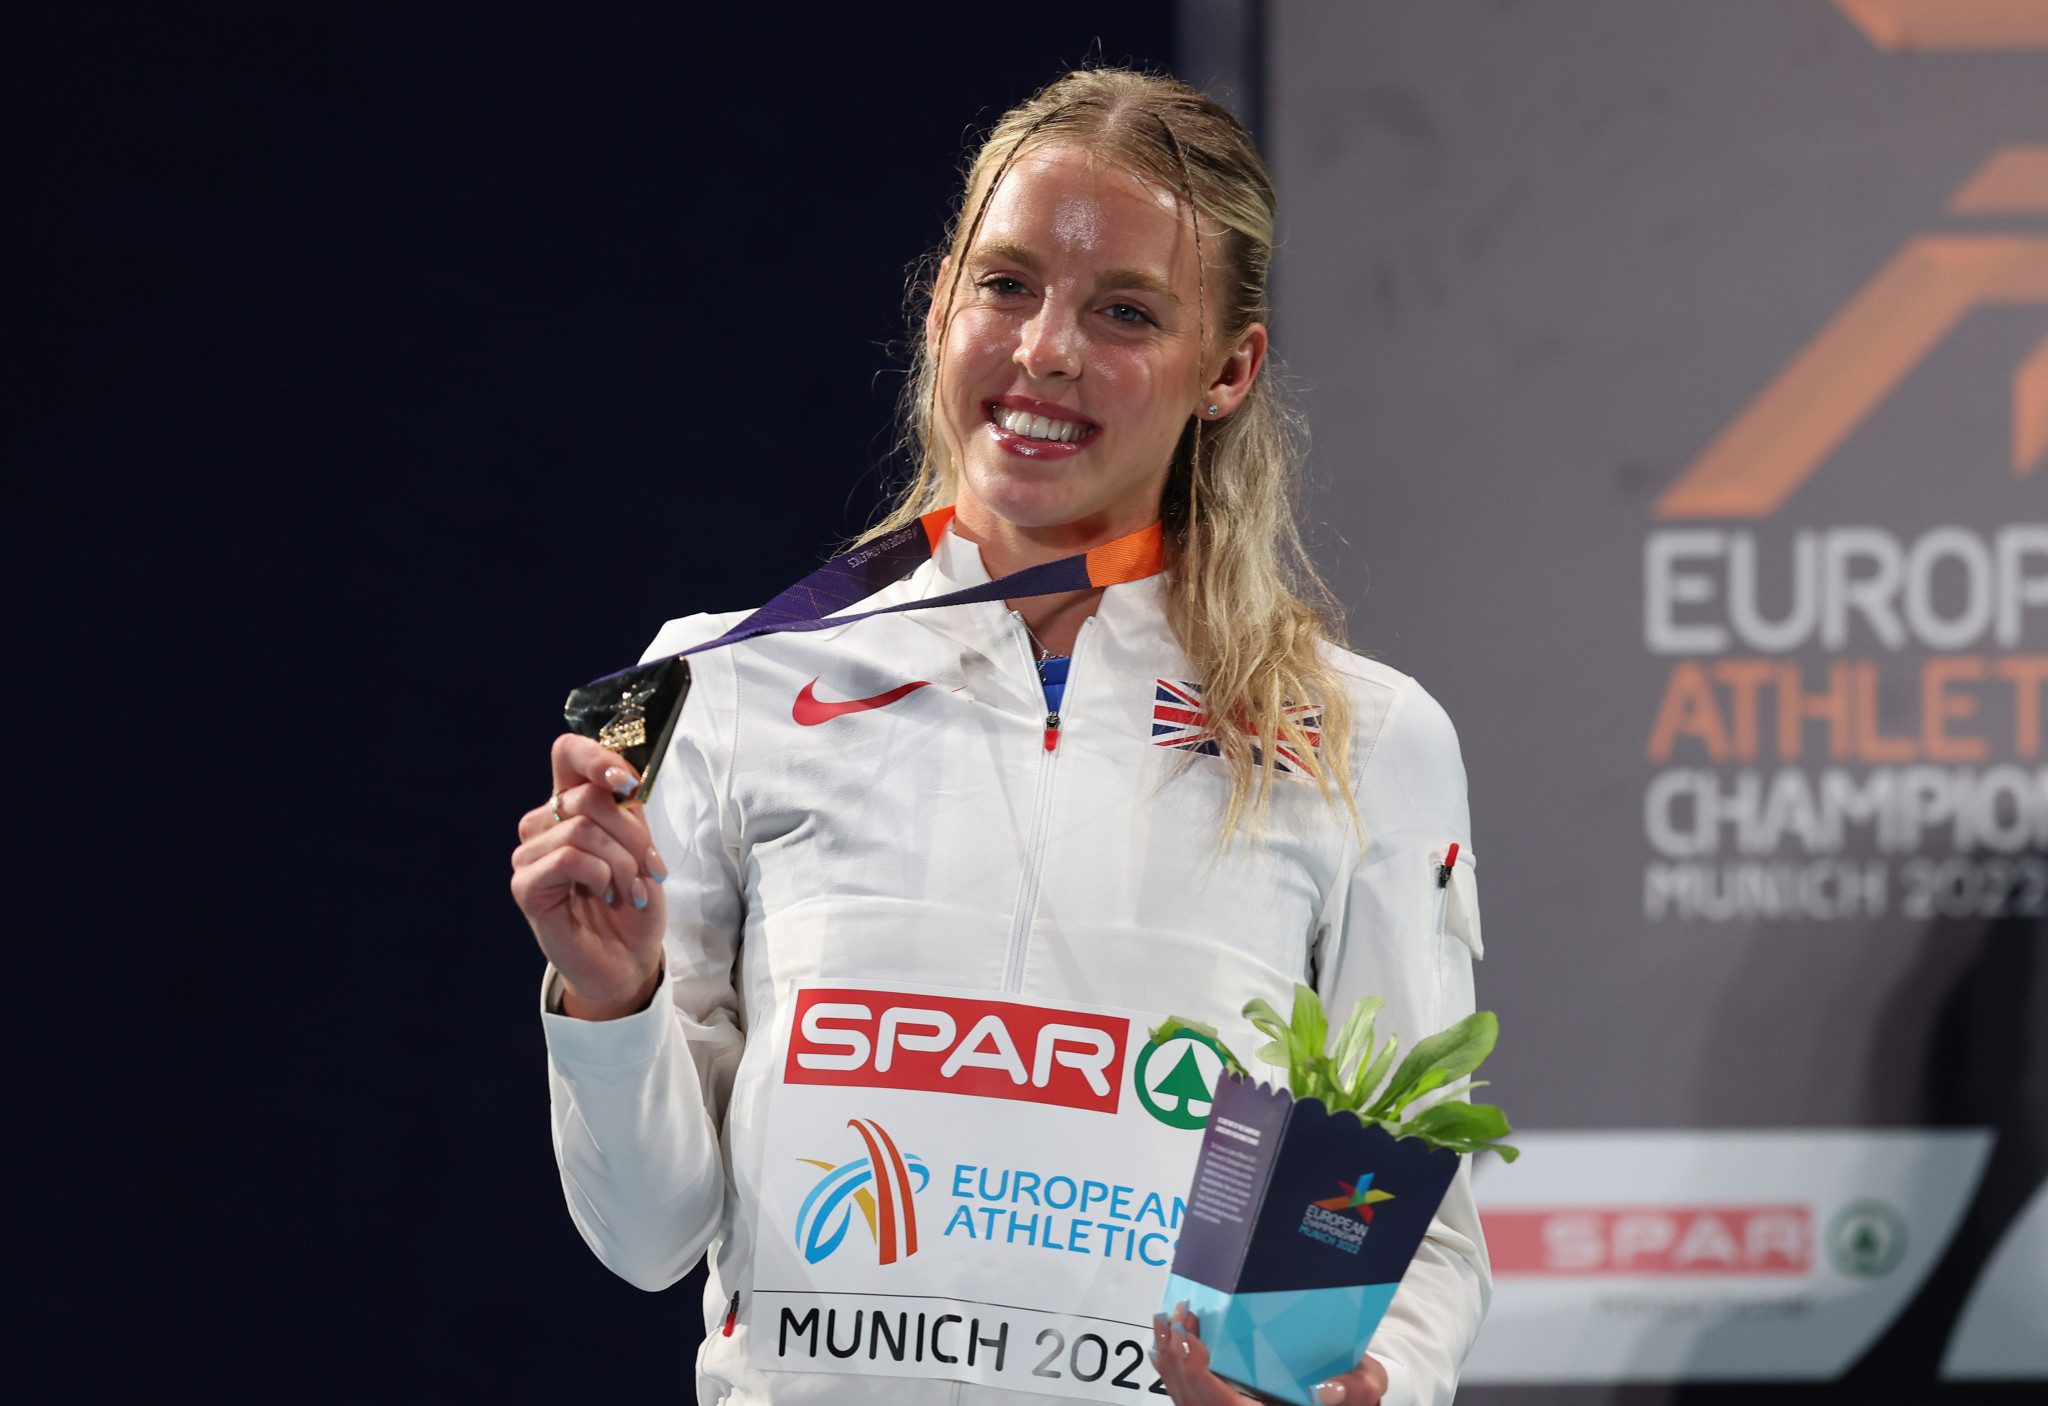 After silver medals at the Tokyo 2020 Olympics, Eugene 2022 World Athletics Championships and Birmingham 2022 Commonwealth Games, Britain's Keely Hodgkinson got her hands on a gold medal in the women's 800m in Munich ©Getty Images